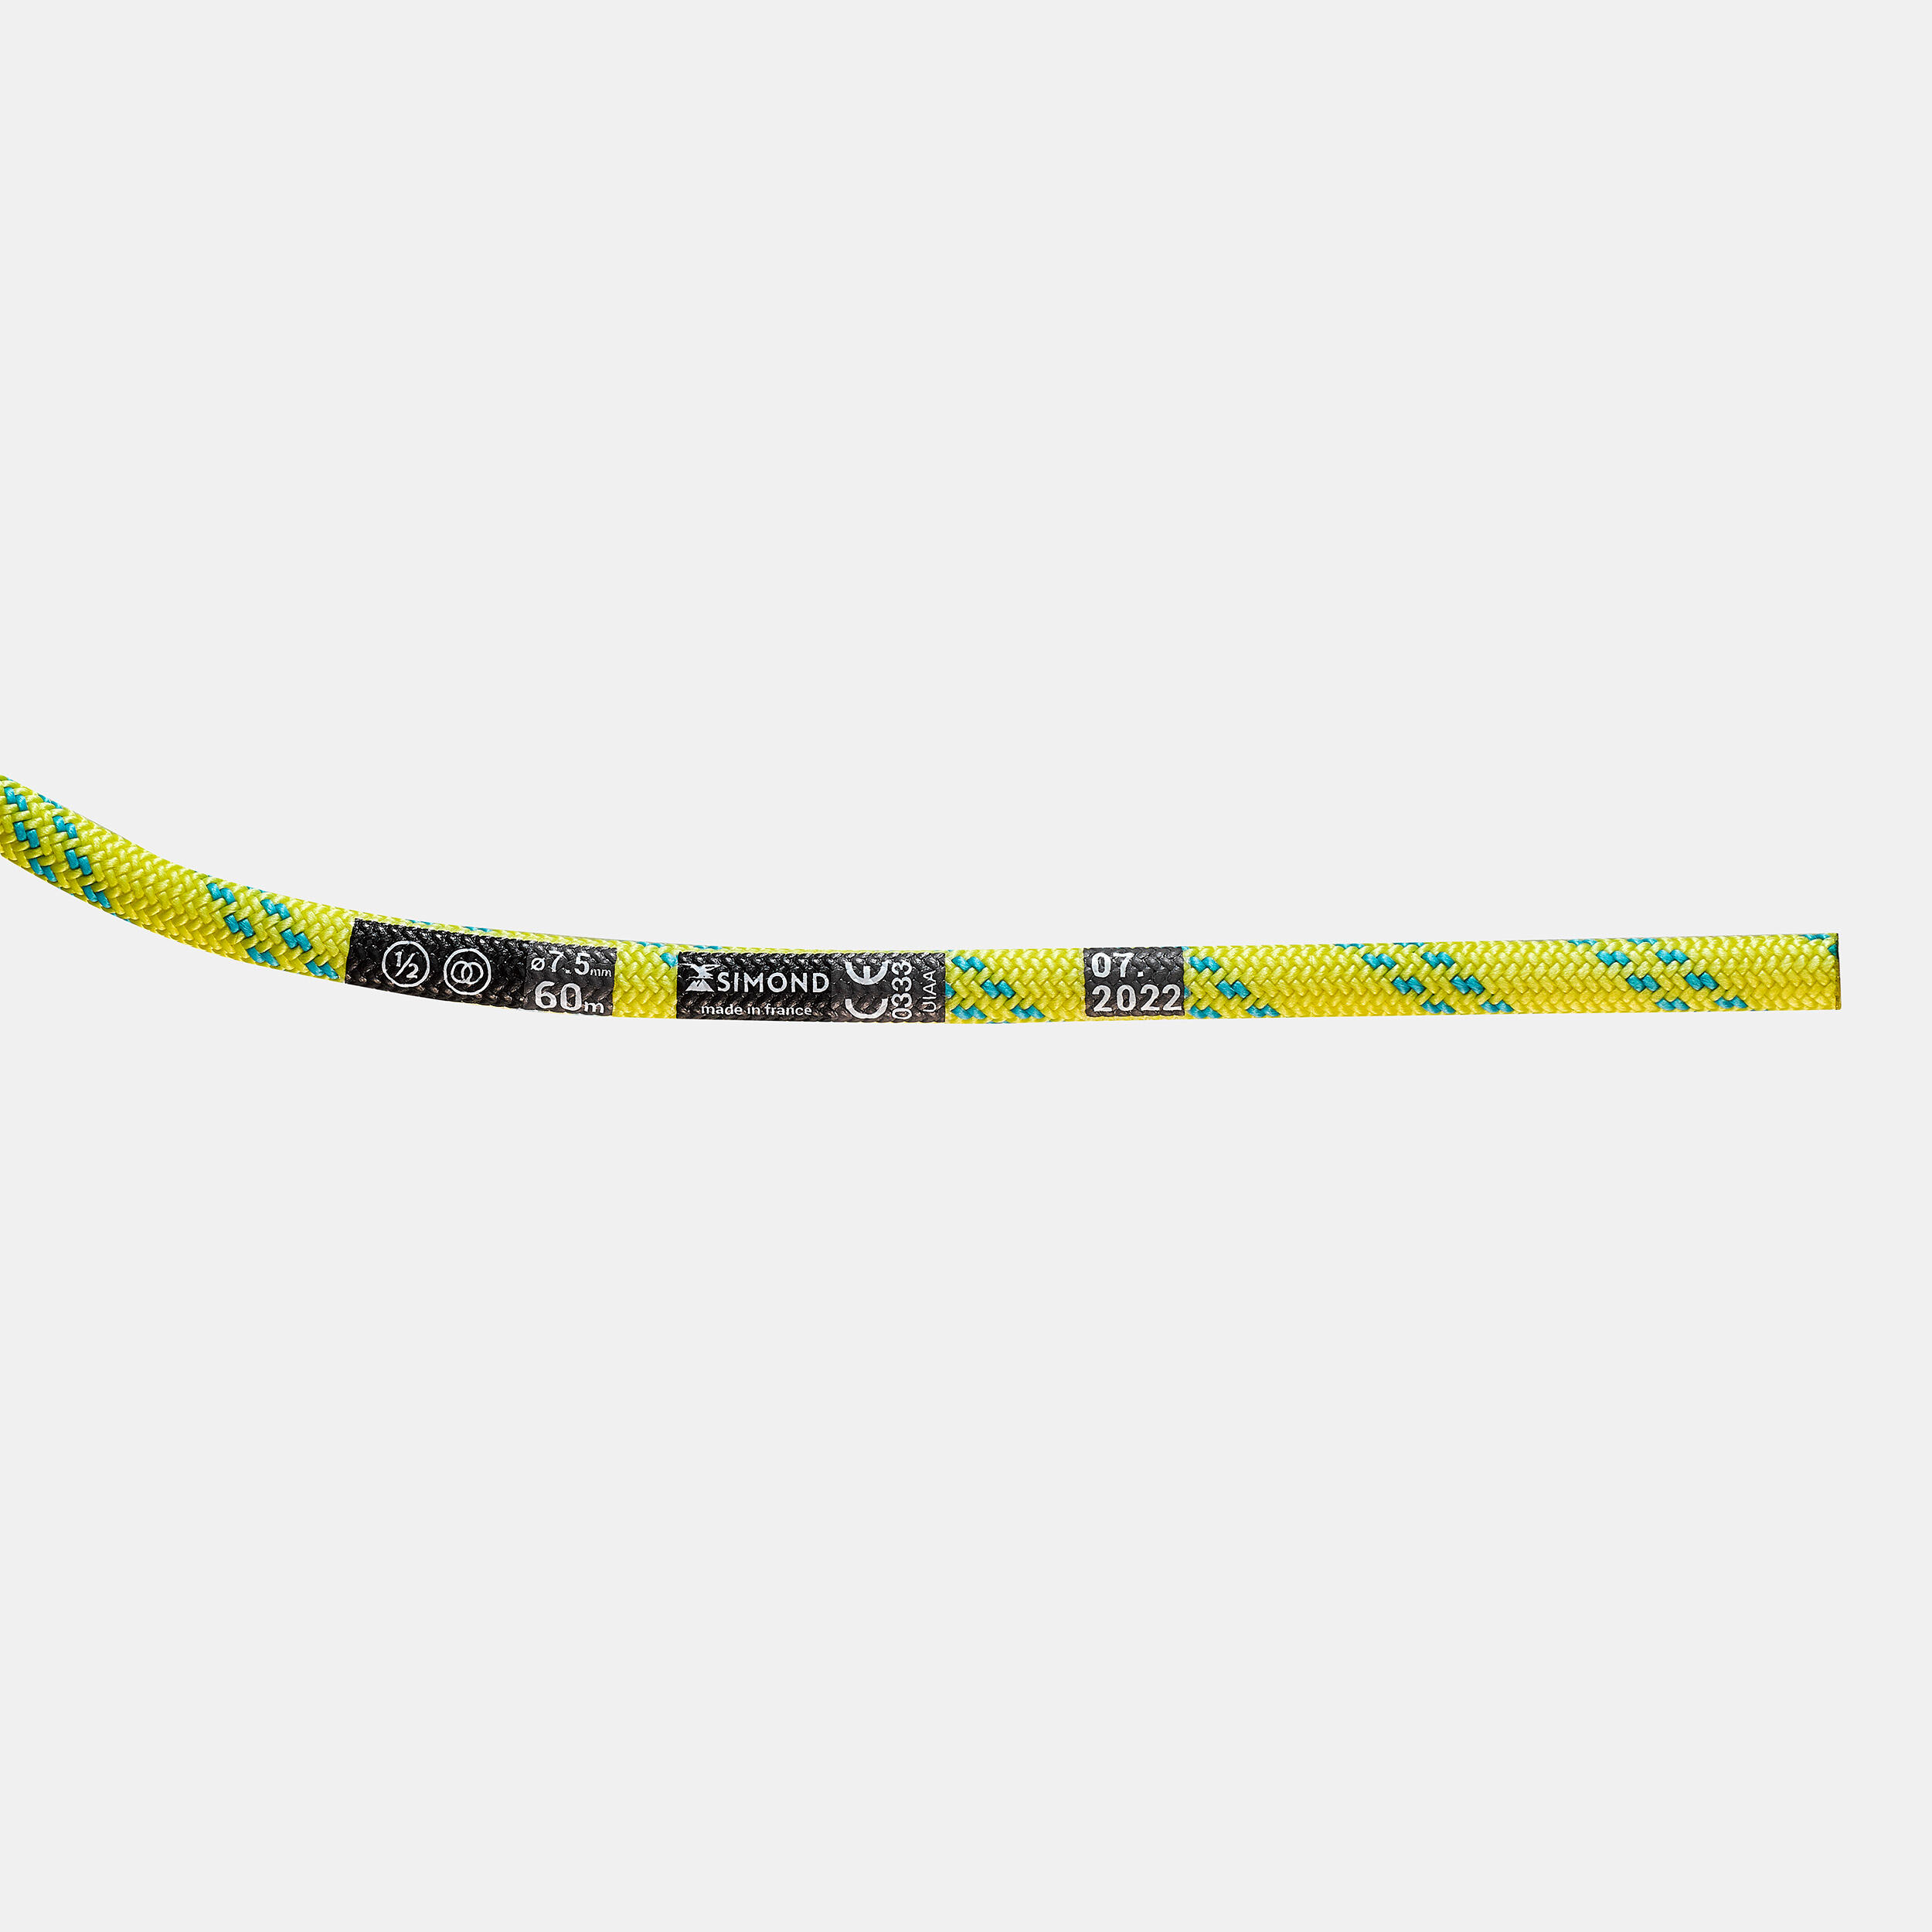 CLIMBING AND MOUNTAINEERING HALF ROPE - ABSEIL ICE 7.5 MM X 60M YELLOW 3/4